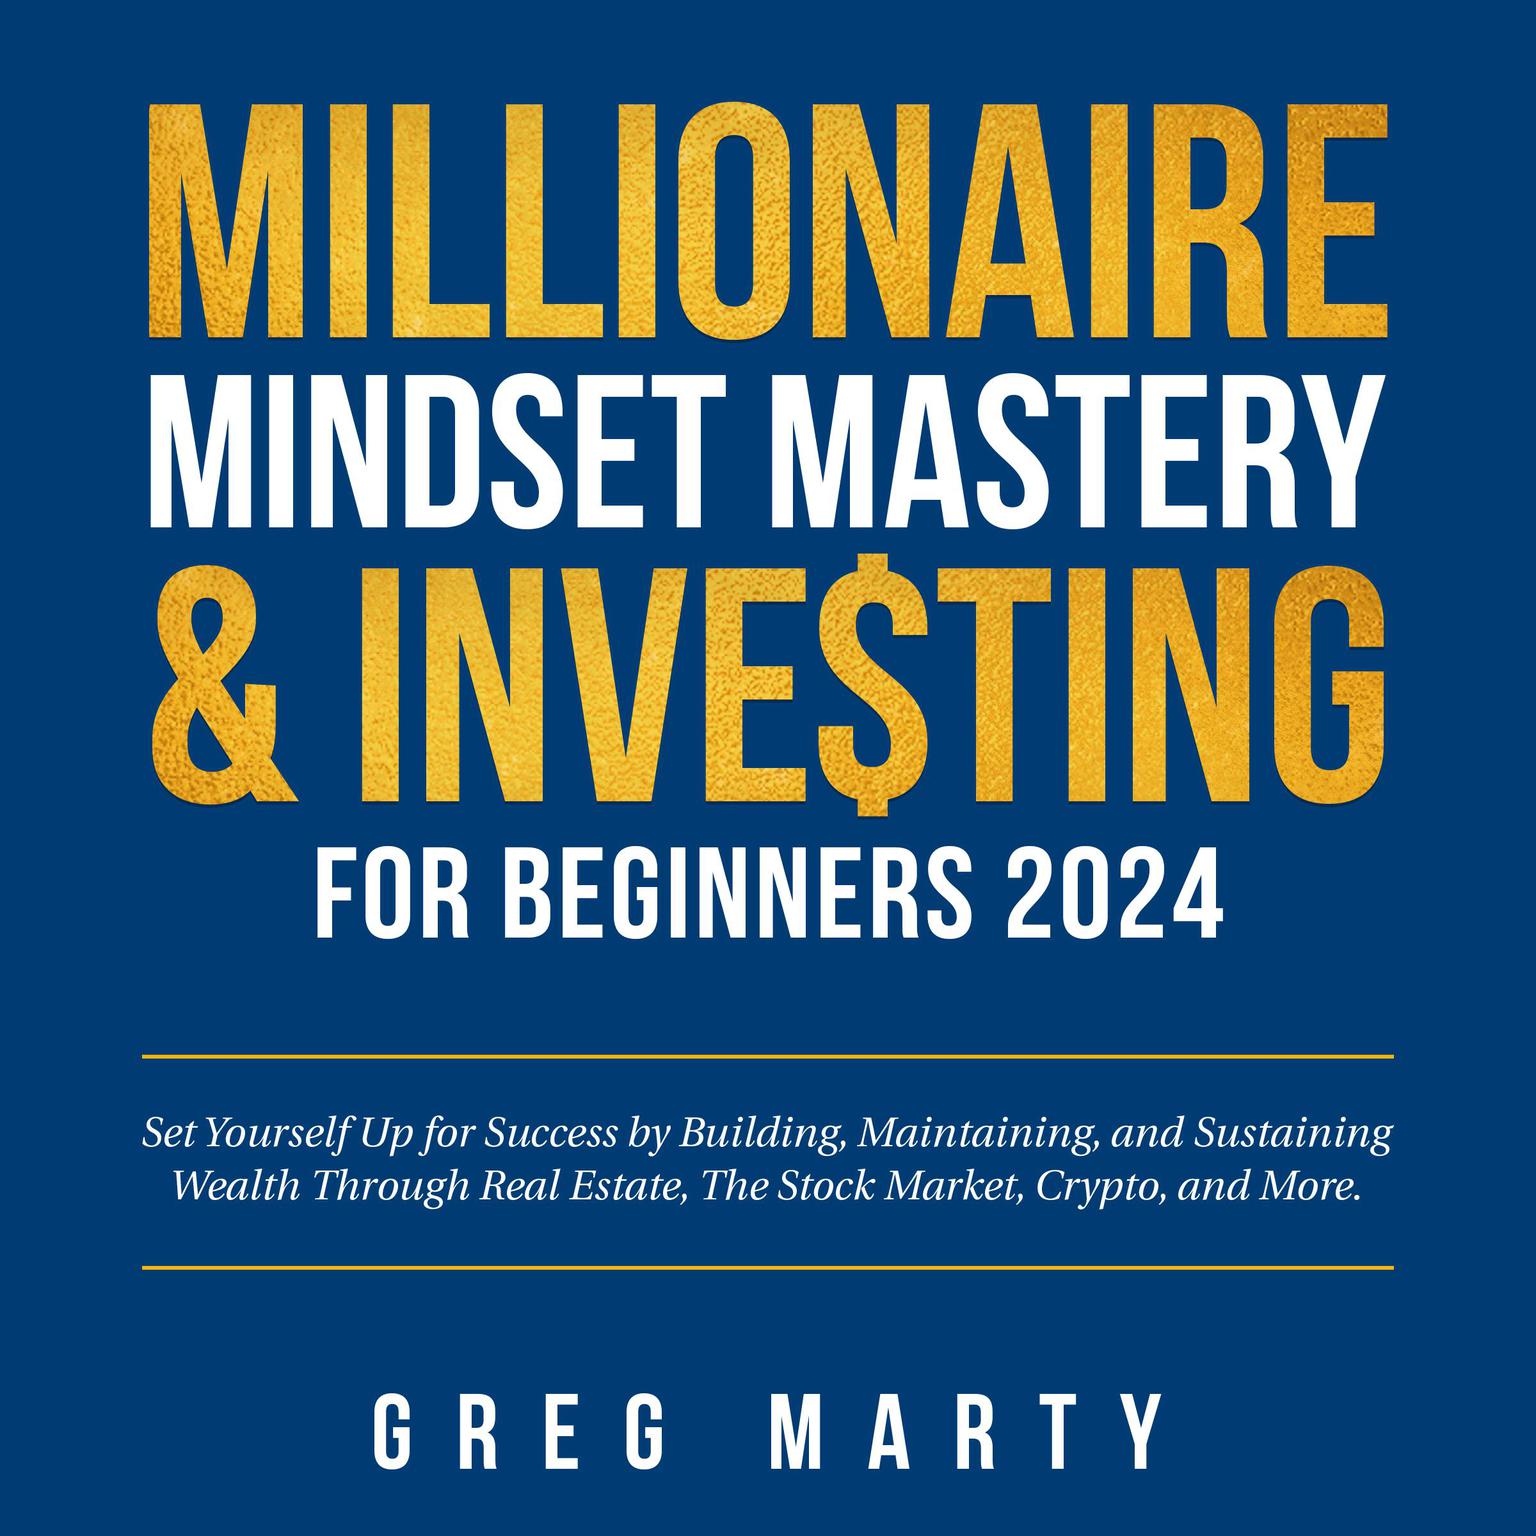 Millionaire Mindset Mastery & Investing for Beginners 2024: Set Yourself Up for Success by Building, Maintaining, and Sustaining Wealth Through Real Estate, The Stock Market, Crypto, and More. Audiobook, by Greg Marty